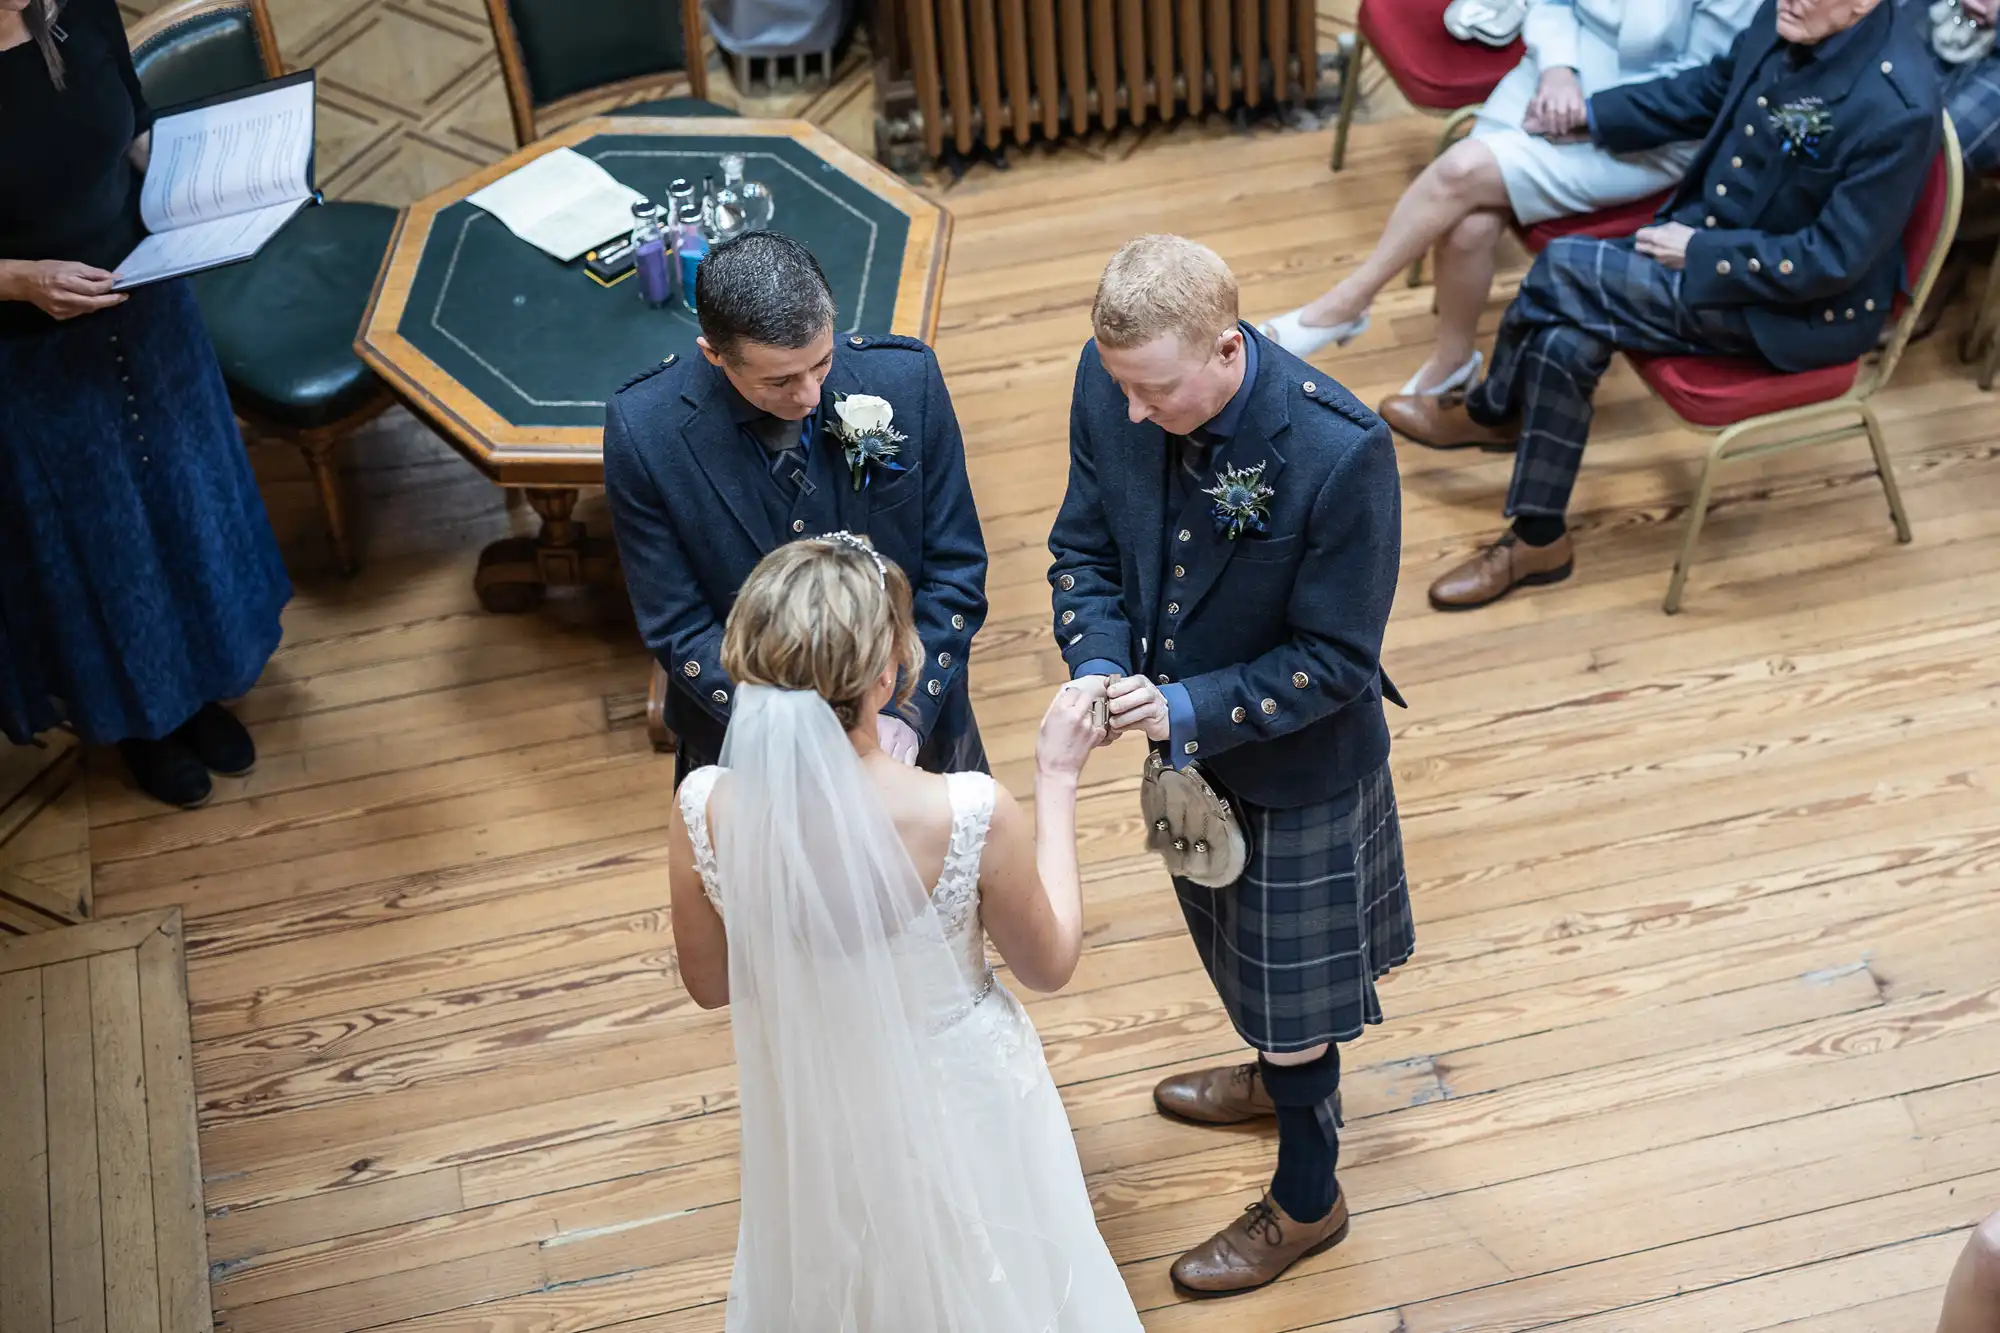 A bride and groom exchange rings during a wedding ceremony. The groom and another man are dressed in kilts, while seated attendees look on.